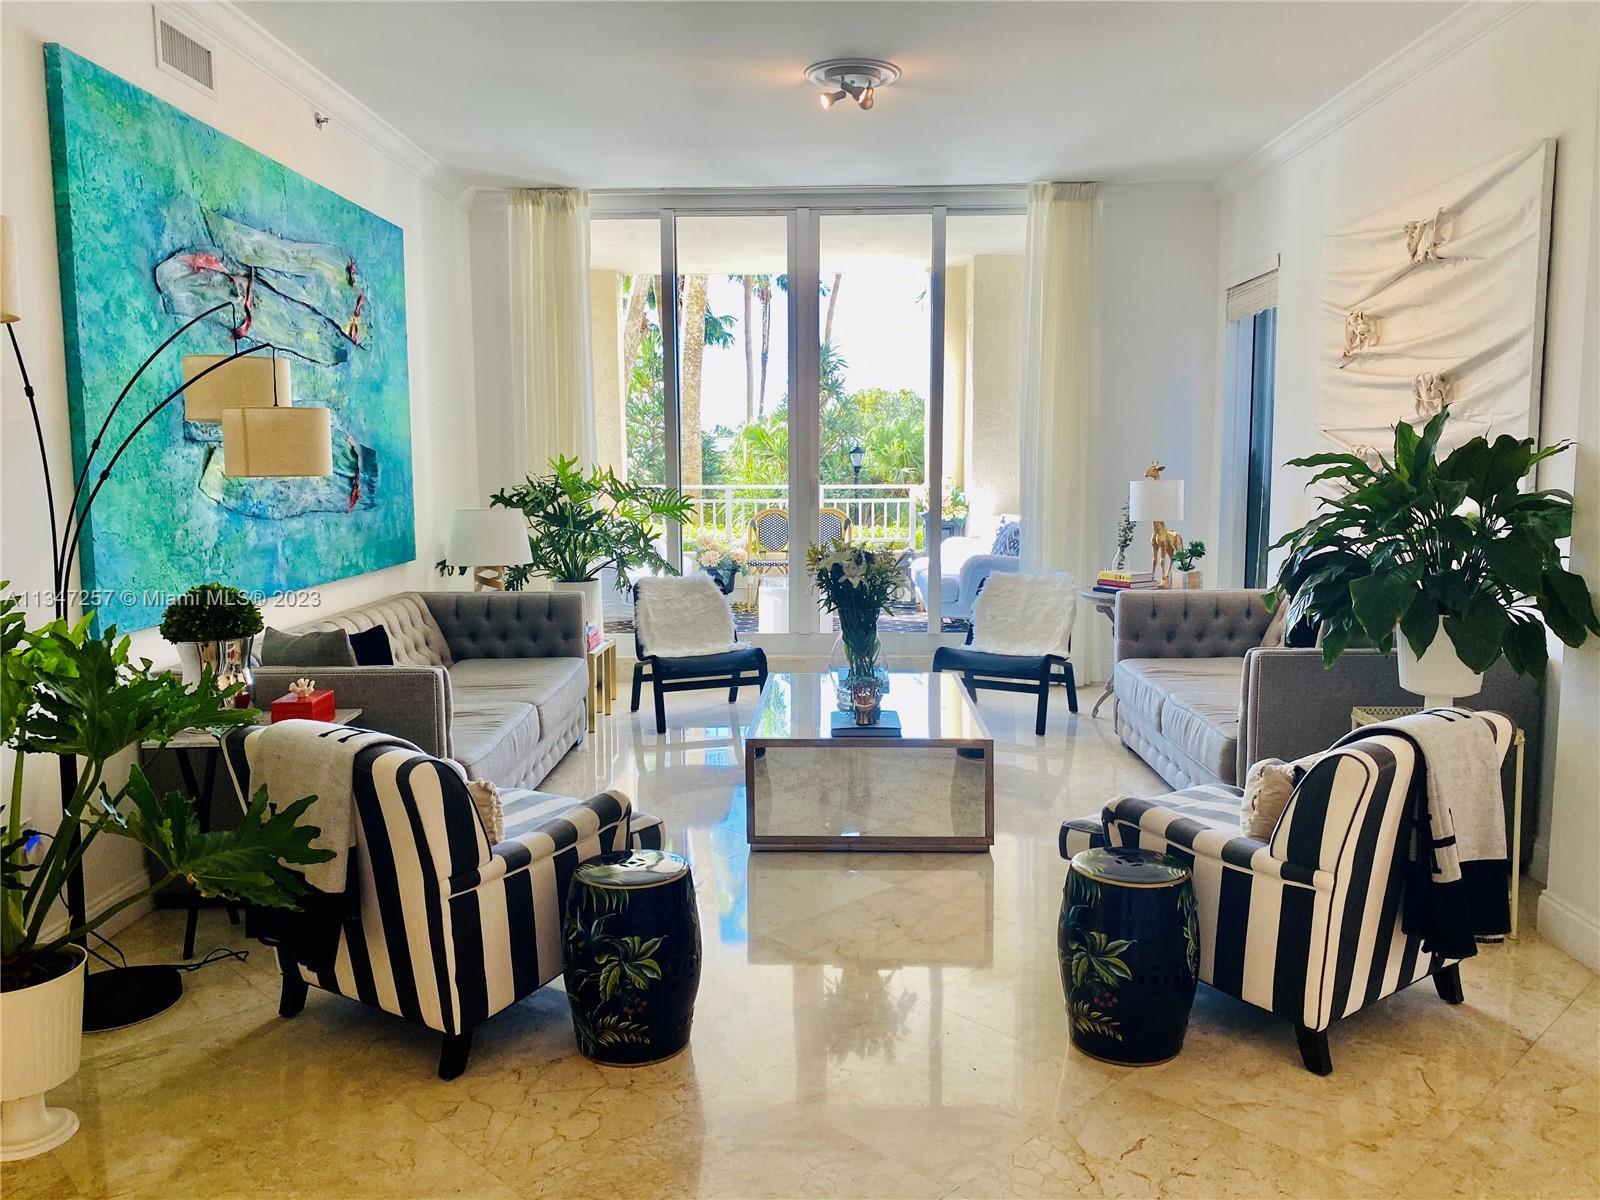 UNIQUE LANAI CORNER OVER 3000+ SqFt WITH HIGH CEALINGS (10 Ft.) ONE OF A KIND IN OCEAN CLUB 4.5 BTH/5 BD - (1 BD is a STAFF QUARTERS) PLUS a DEN. 2 LARGE BALCONIES WITH GARDEN VIEW. GROUND LEVEL CREATING A HOME SENSATION WITH LUXURY AMENITIES, STEPS FROM THE BEACH. OVERSIZED MASTER (FITS 2 KING BEDS). DESIGNER FINISHES, MARBLE TILE, BAMBOO WOOD FLOORS IN BEDROOMS & GRANITE KITCHEN COUNTERTOPS. BREAKFAST AREA, CUSTOM CURTAINS AND BLACKOUTS. PRIVATE STORAGE & 2 COVERED PARKING SPACES, VALET, MAGNIFICENT GYM, CLUB, HAIR SALON, SPA, POOLS, TENNIS, KIDS PLAYGROUND, BEACH SERVICE, RESTAURANTS AND MUCH MORE! ANY SIZE BABY STROLLER AND HANDICAPPED ACCESSIBLE. No stairs or elevators inside or to enter the unit. Furniture not included- negotiable with tenant.